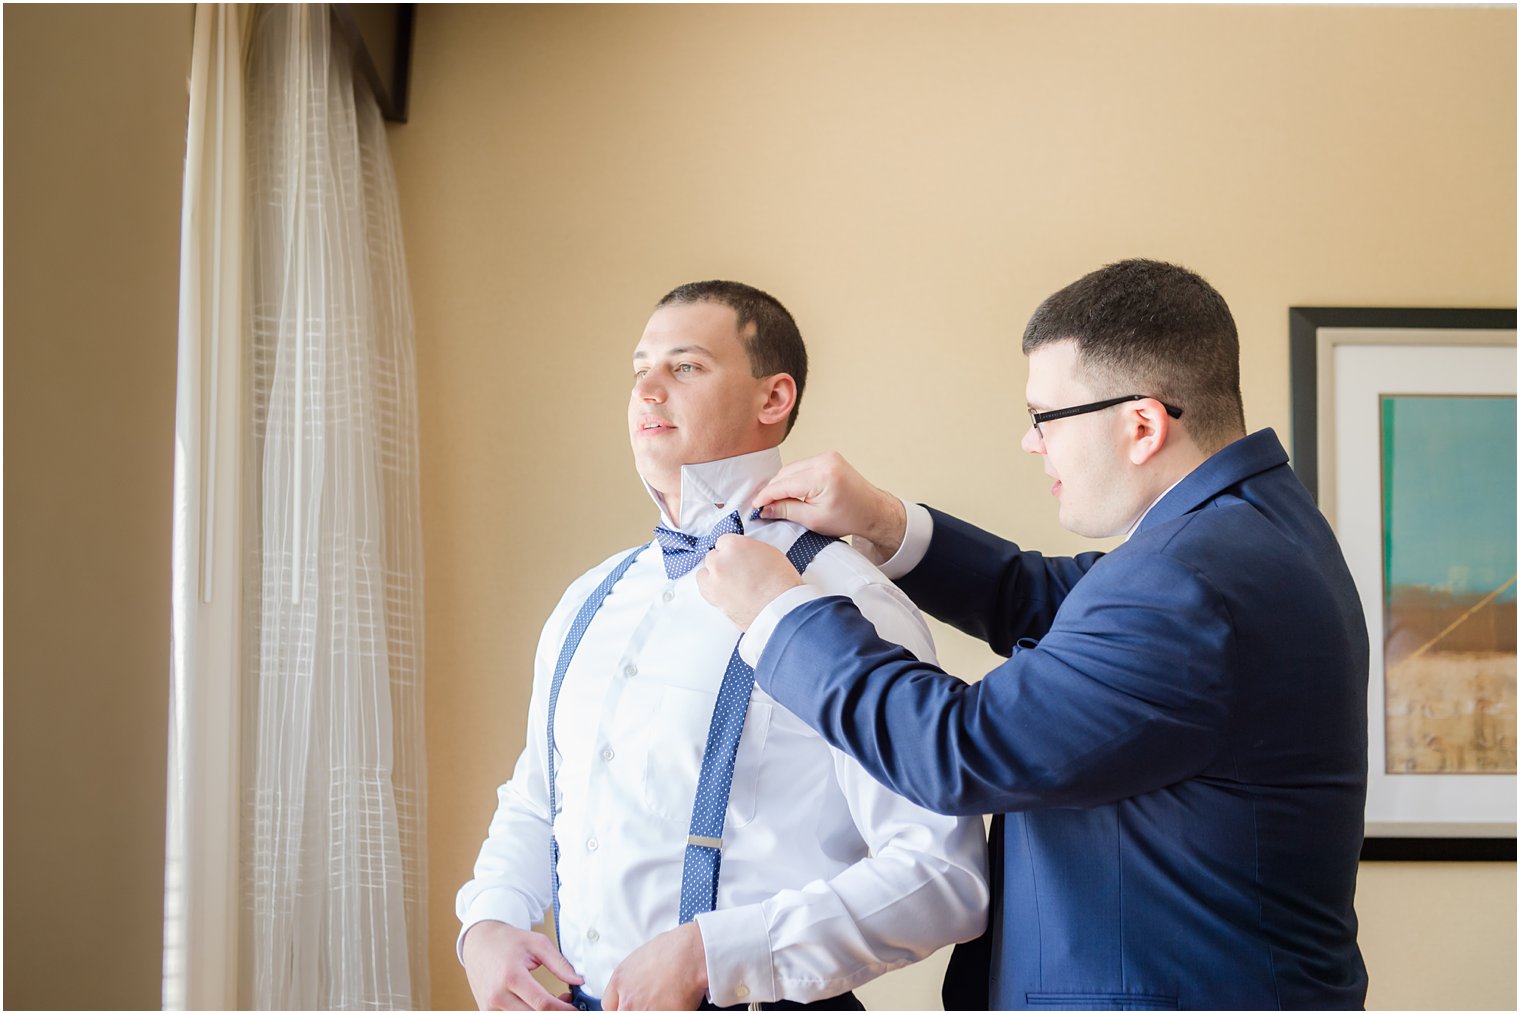 Best man helping groom with bow tie for wedding at Windows on the Water at Frogbridge in Millstone NJ